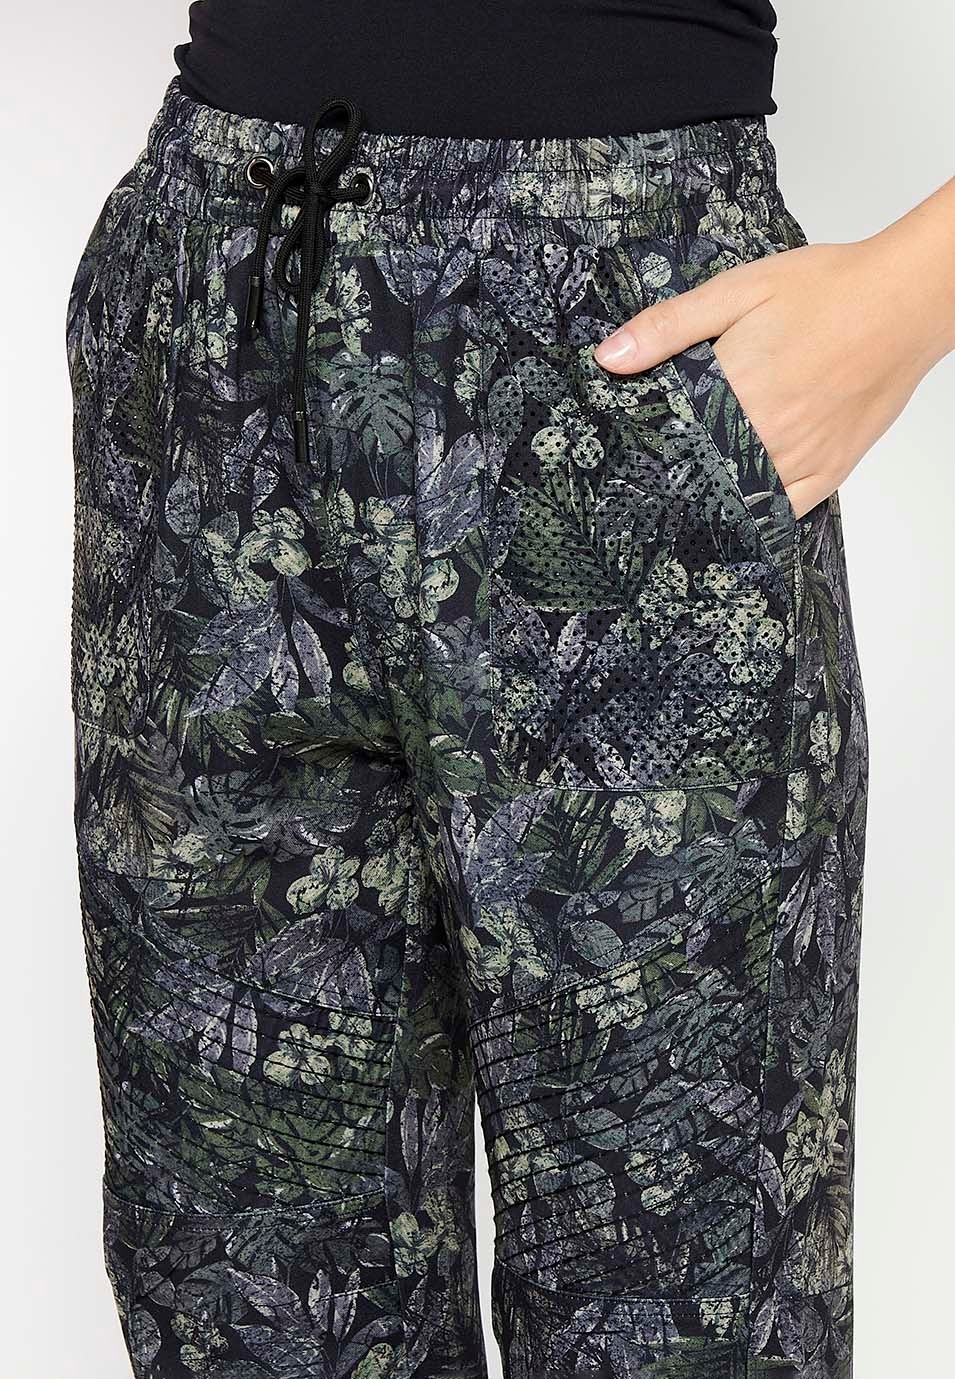 Long jogging pants fitted at the ankles with elasticated waistband with drawstring and Khaki floral print for Women 6